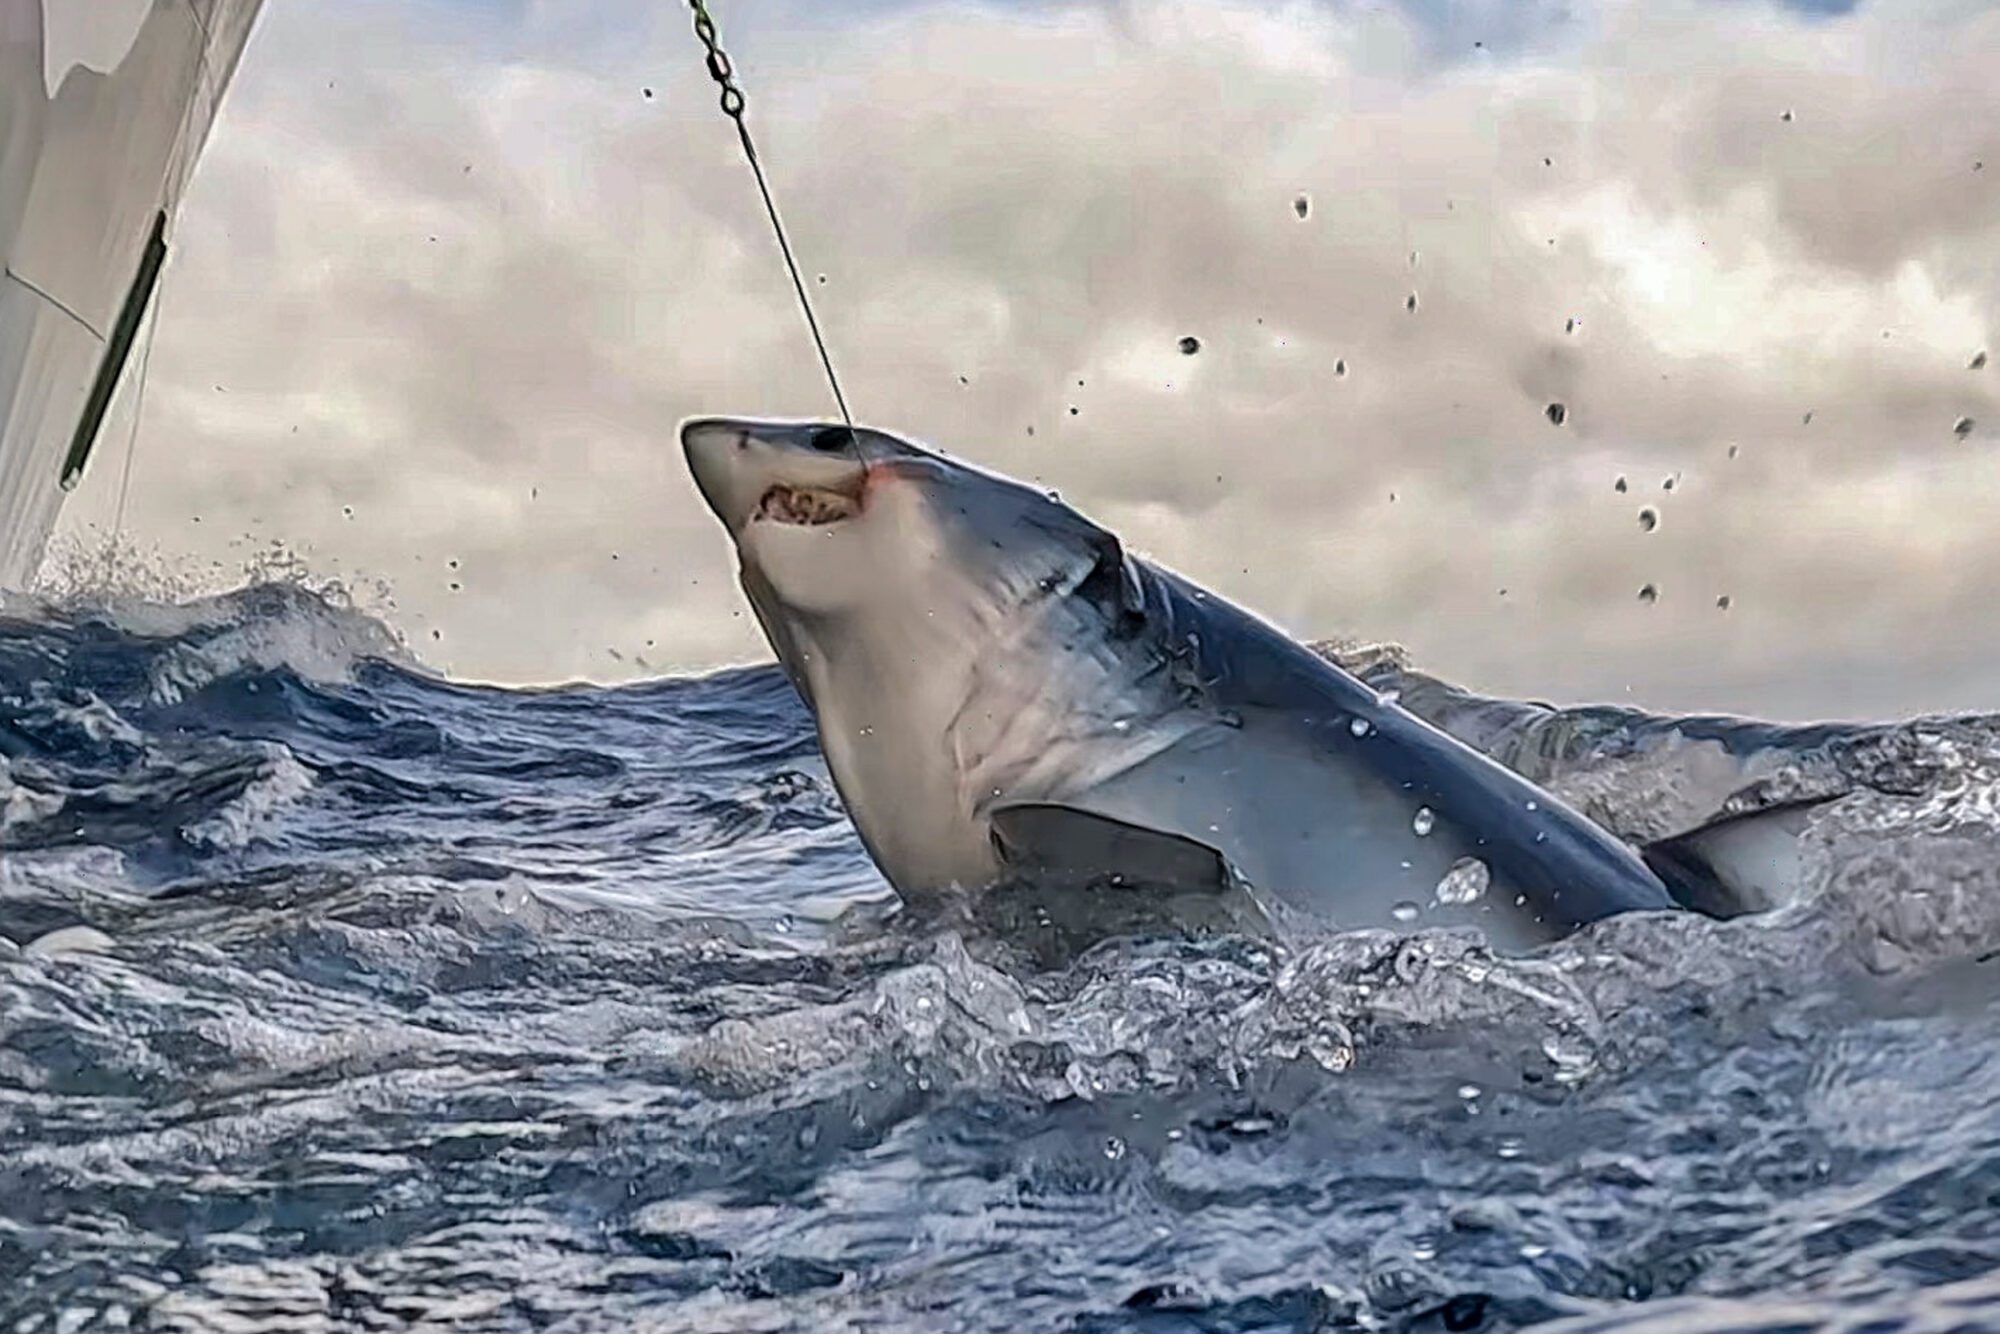 A shark caught on a hooked fishing line emerges from the ocean. The hook pulls painfully on the side of its mouth.